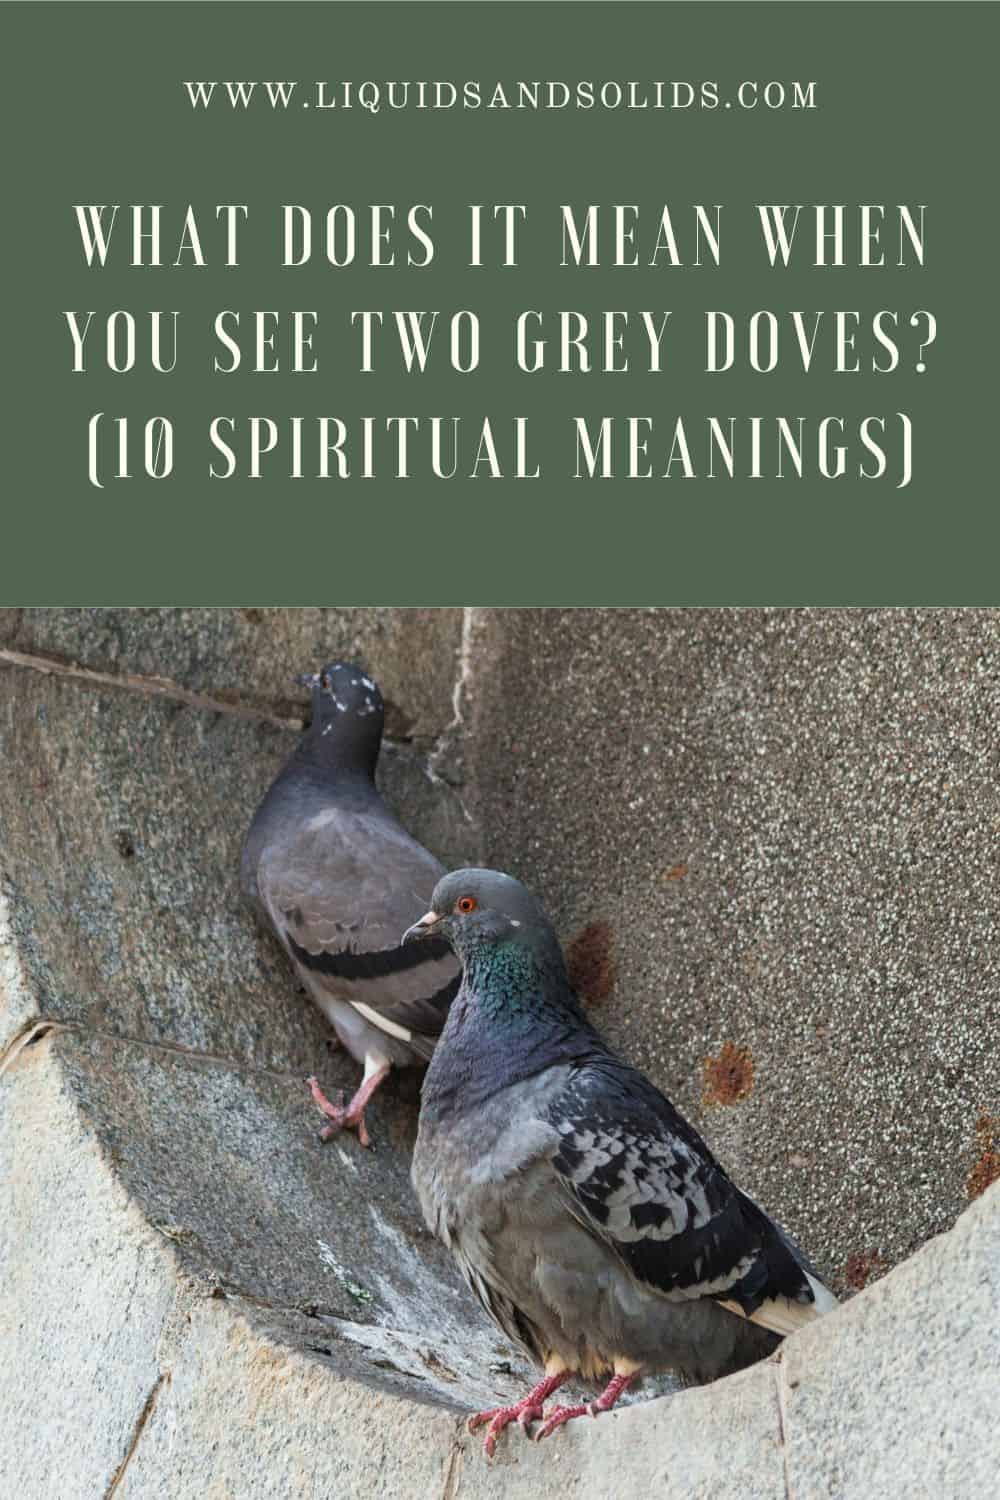 What Does It Mean When You See Two Grey Doves? (10 Spiritual Meanings)